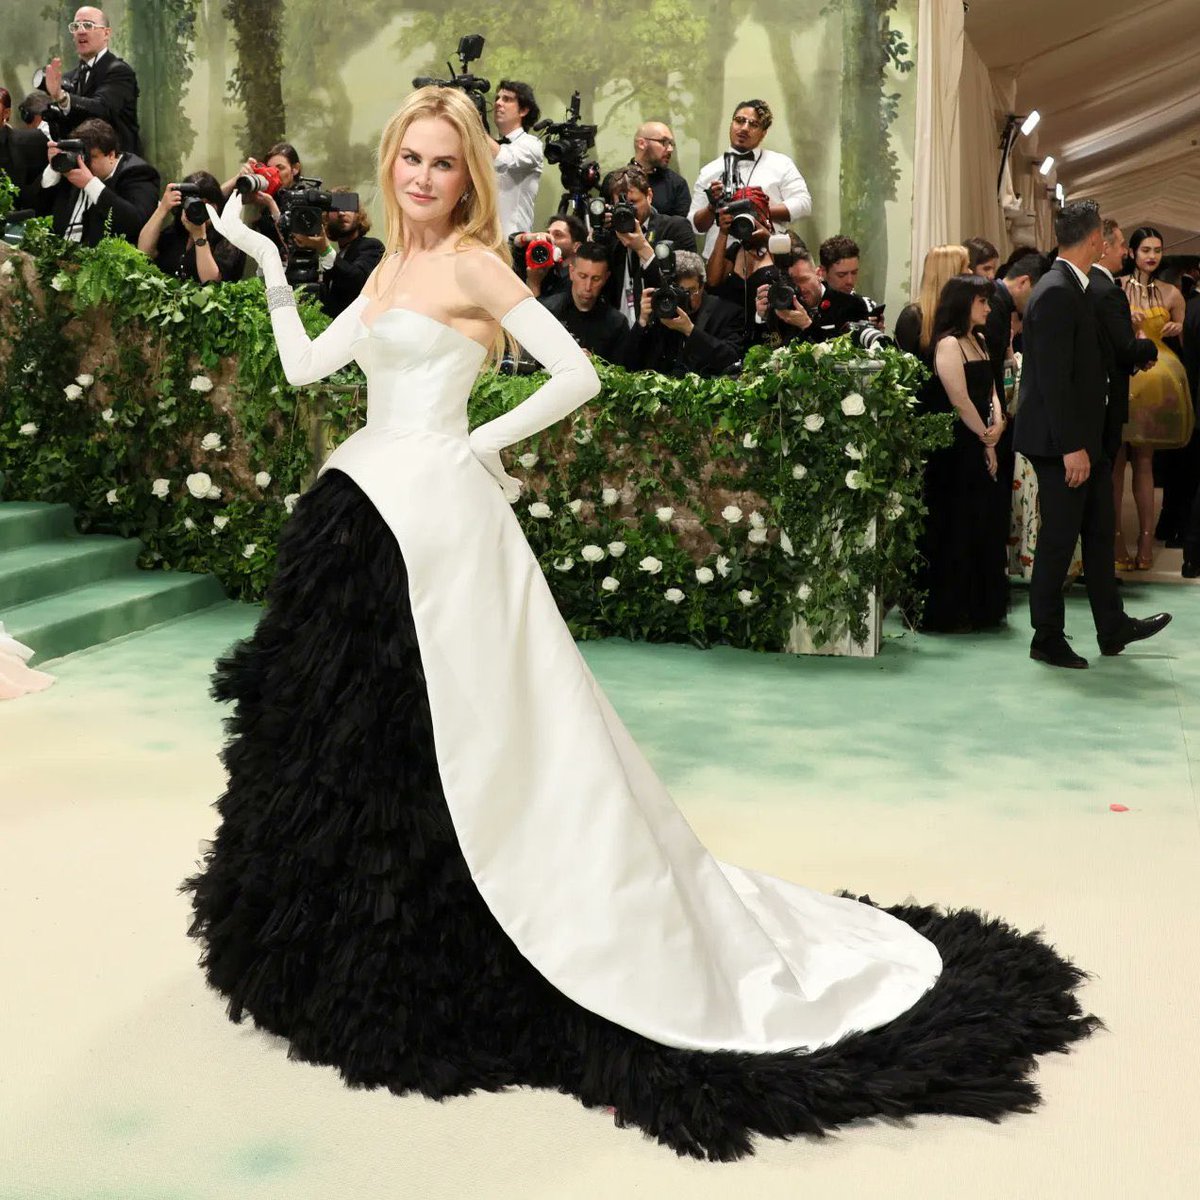 Awestruck at this Balenciaga look from Nicole. She has been a red carpet style icon for decades at this point and she continues to reign - respect is deserved!#nicolekidman #balenciaga #MetGala